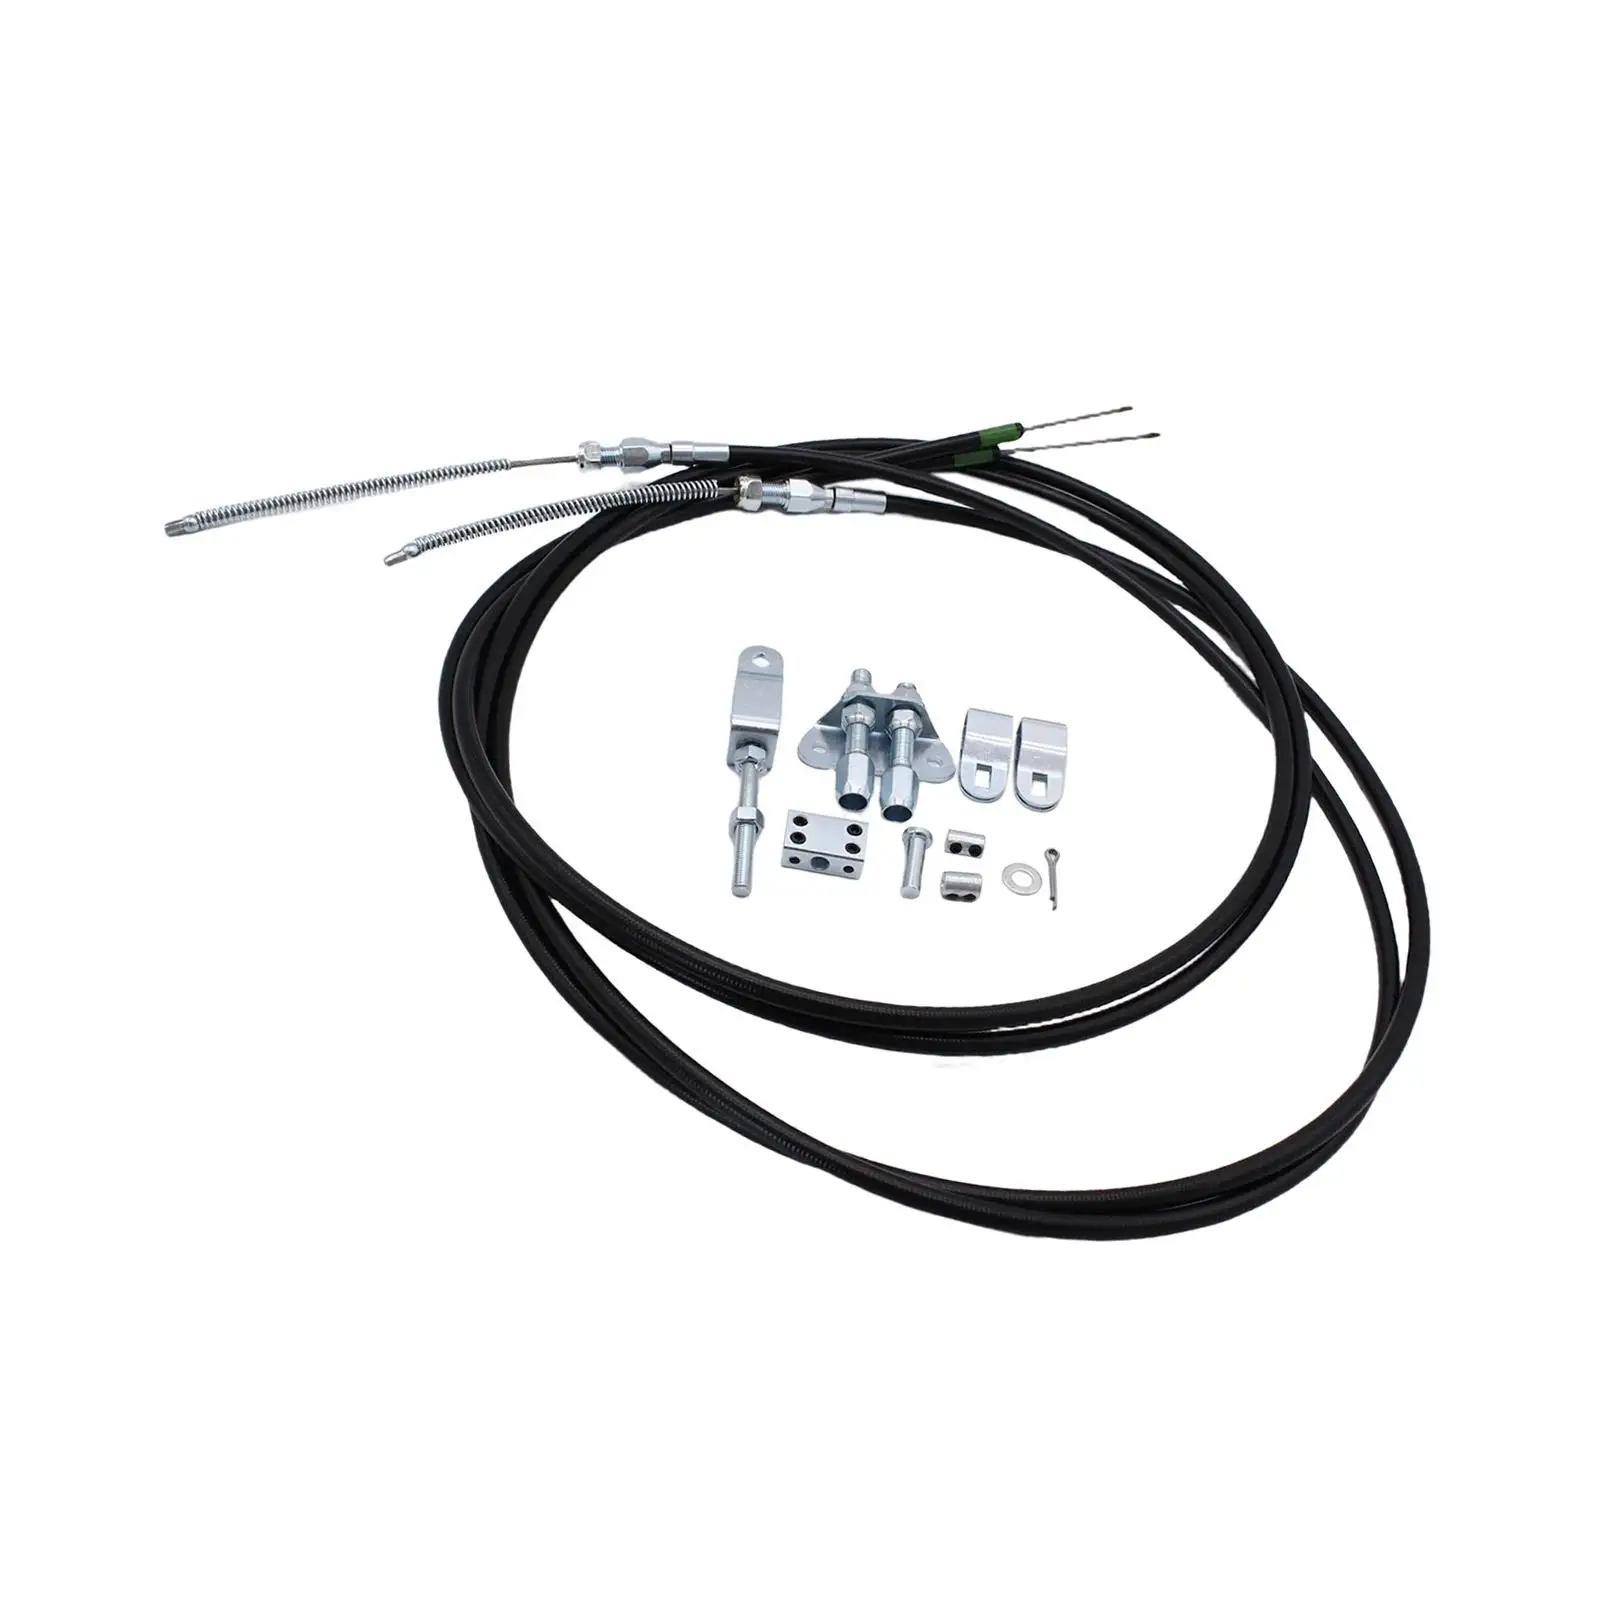 Car Emergency Parking Brake Cable Set 330-9371 Easily Install Wear Resistant Sturdy Adjustable Include Installation Hardware